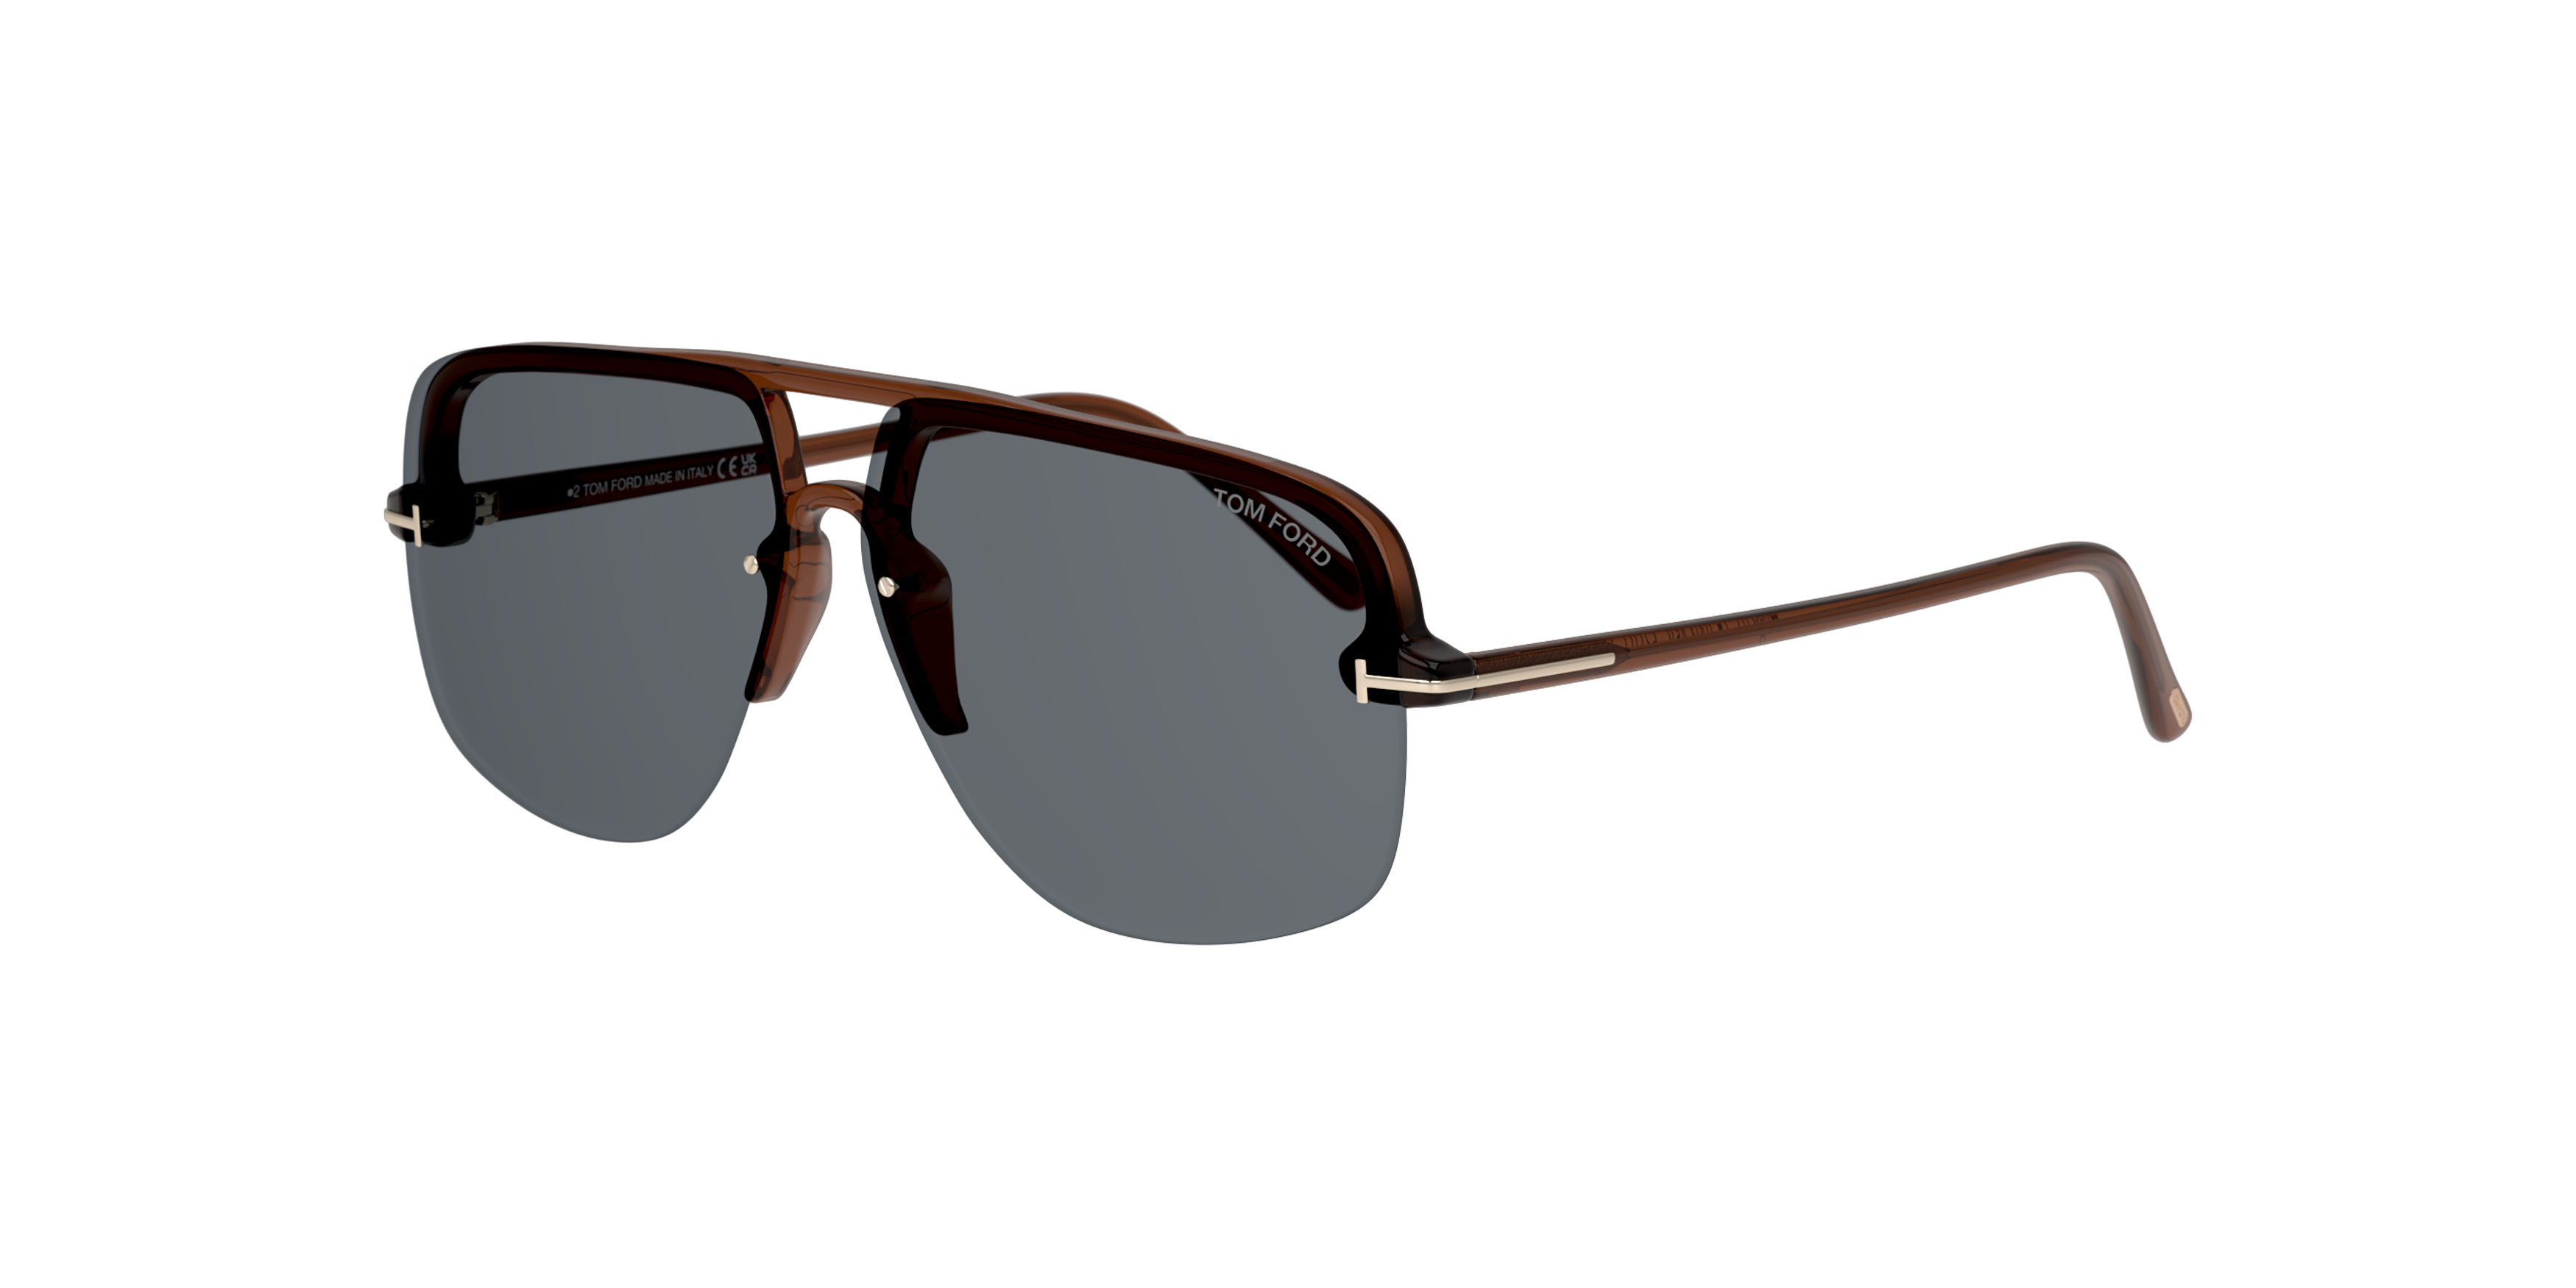 Angle_Left01 Tom Ford FT 1003 Sunglasses Blue / Brown